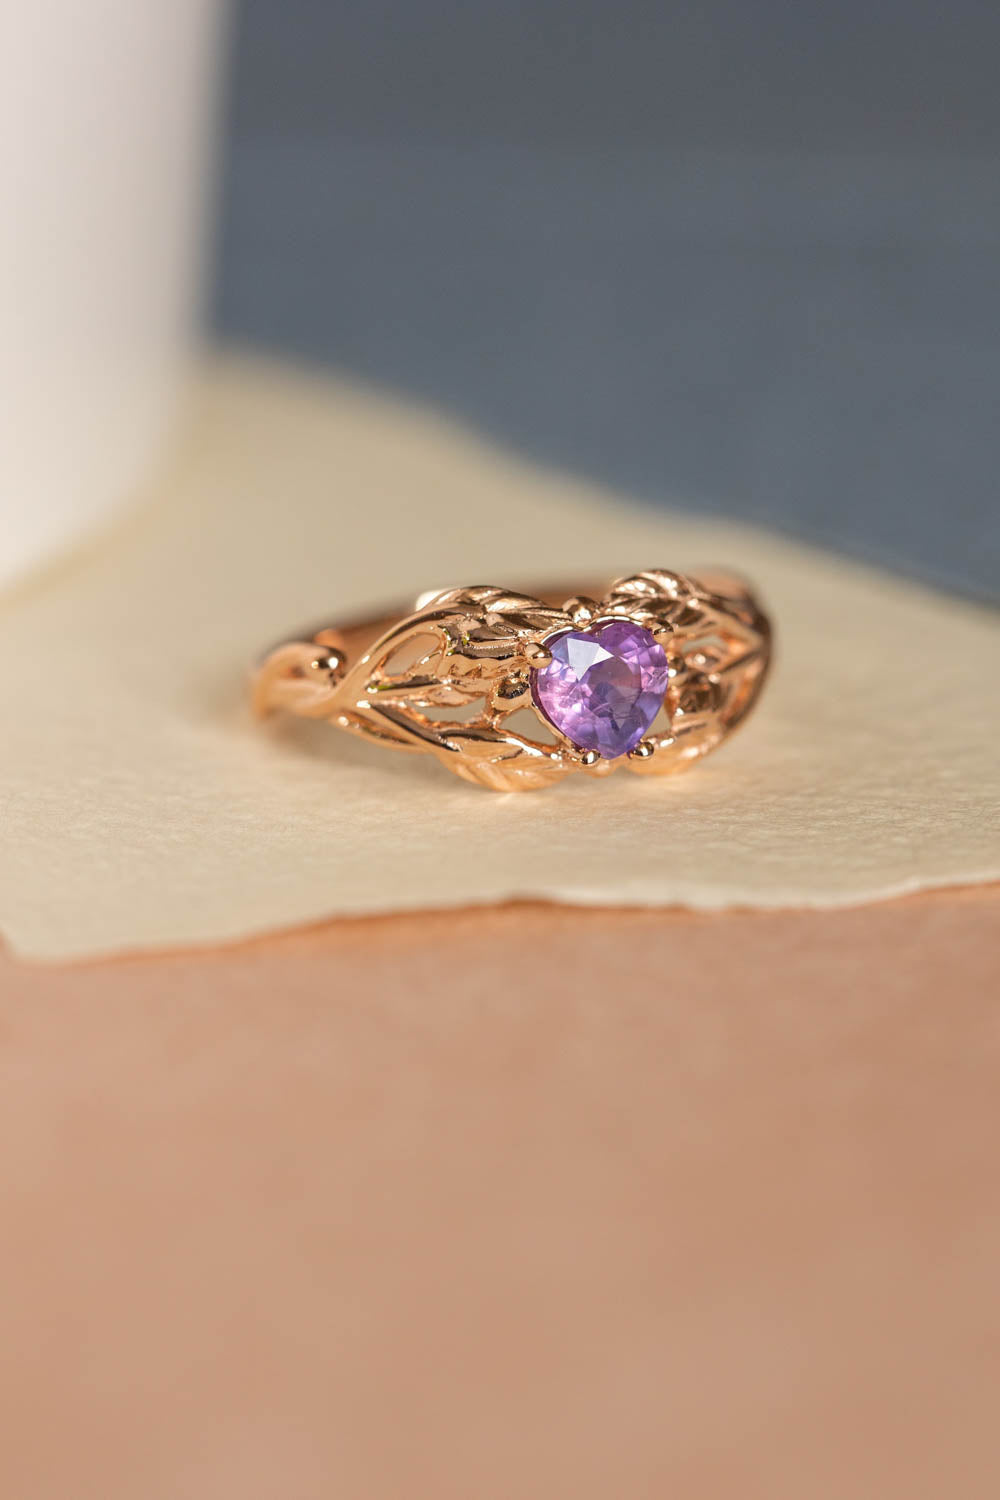 Heart sapphire twig engagement ring, rose gold ring with sapphire / Tilia - Eden Garden Jewelry™